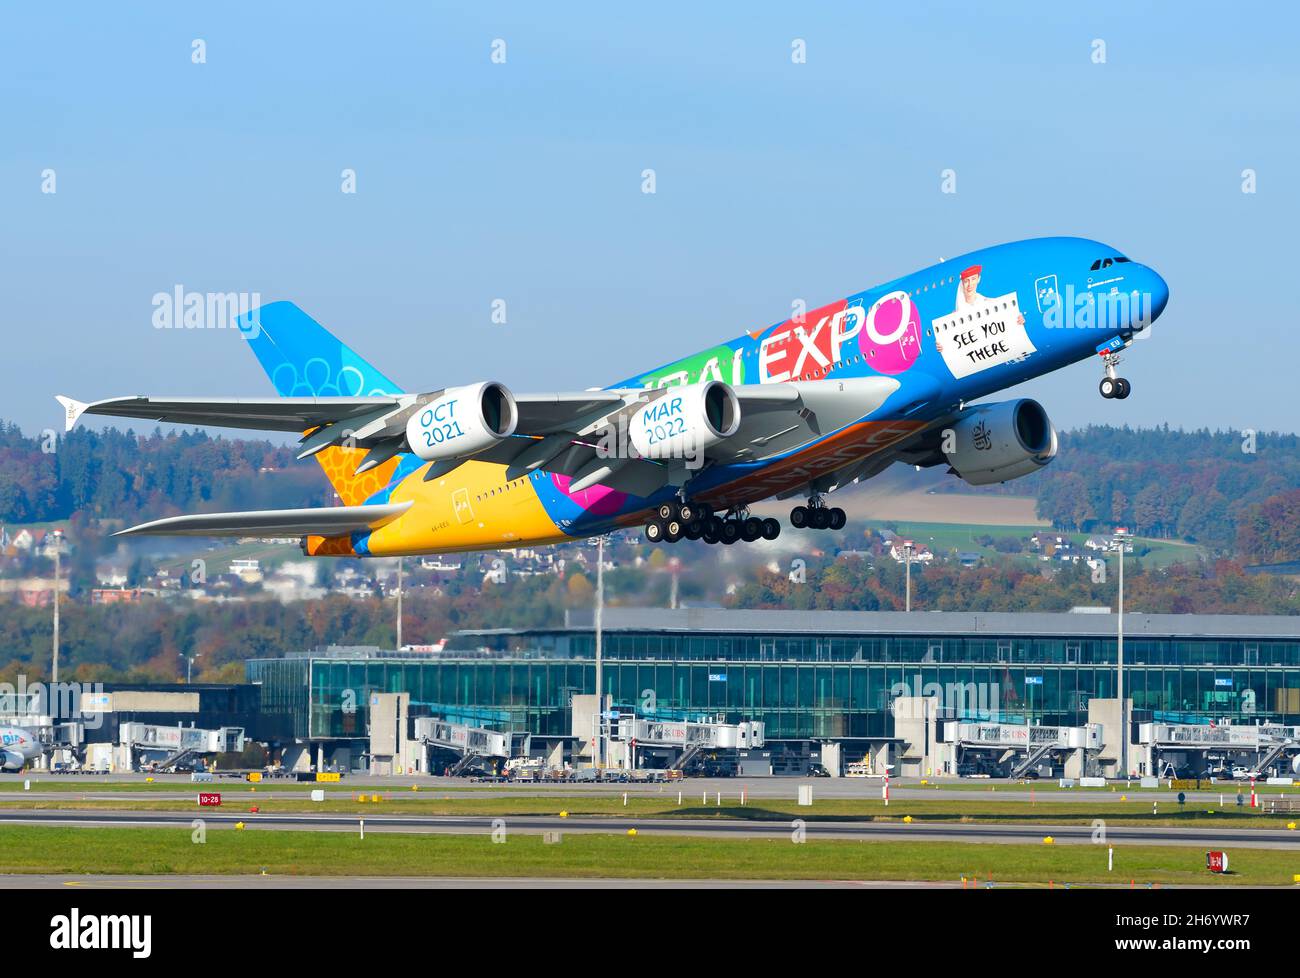 Emirates Airline Expo 2020 special livery Airbus A380 airplane taking off. Aircraft A380-800 featuring a colourful livery Blue Expo. Stock Photo